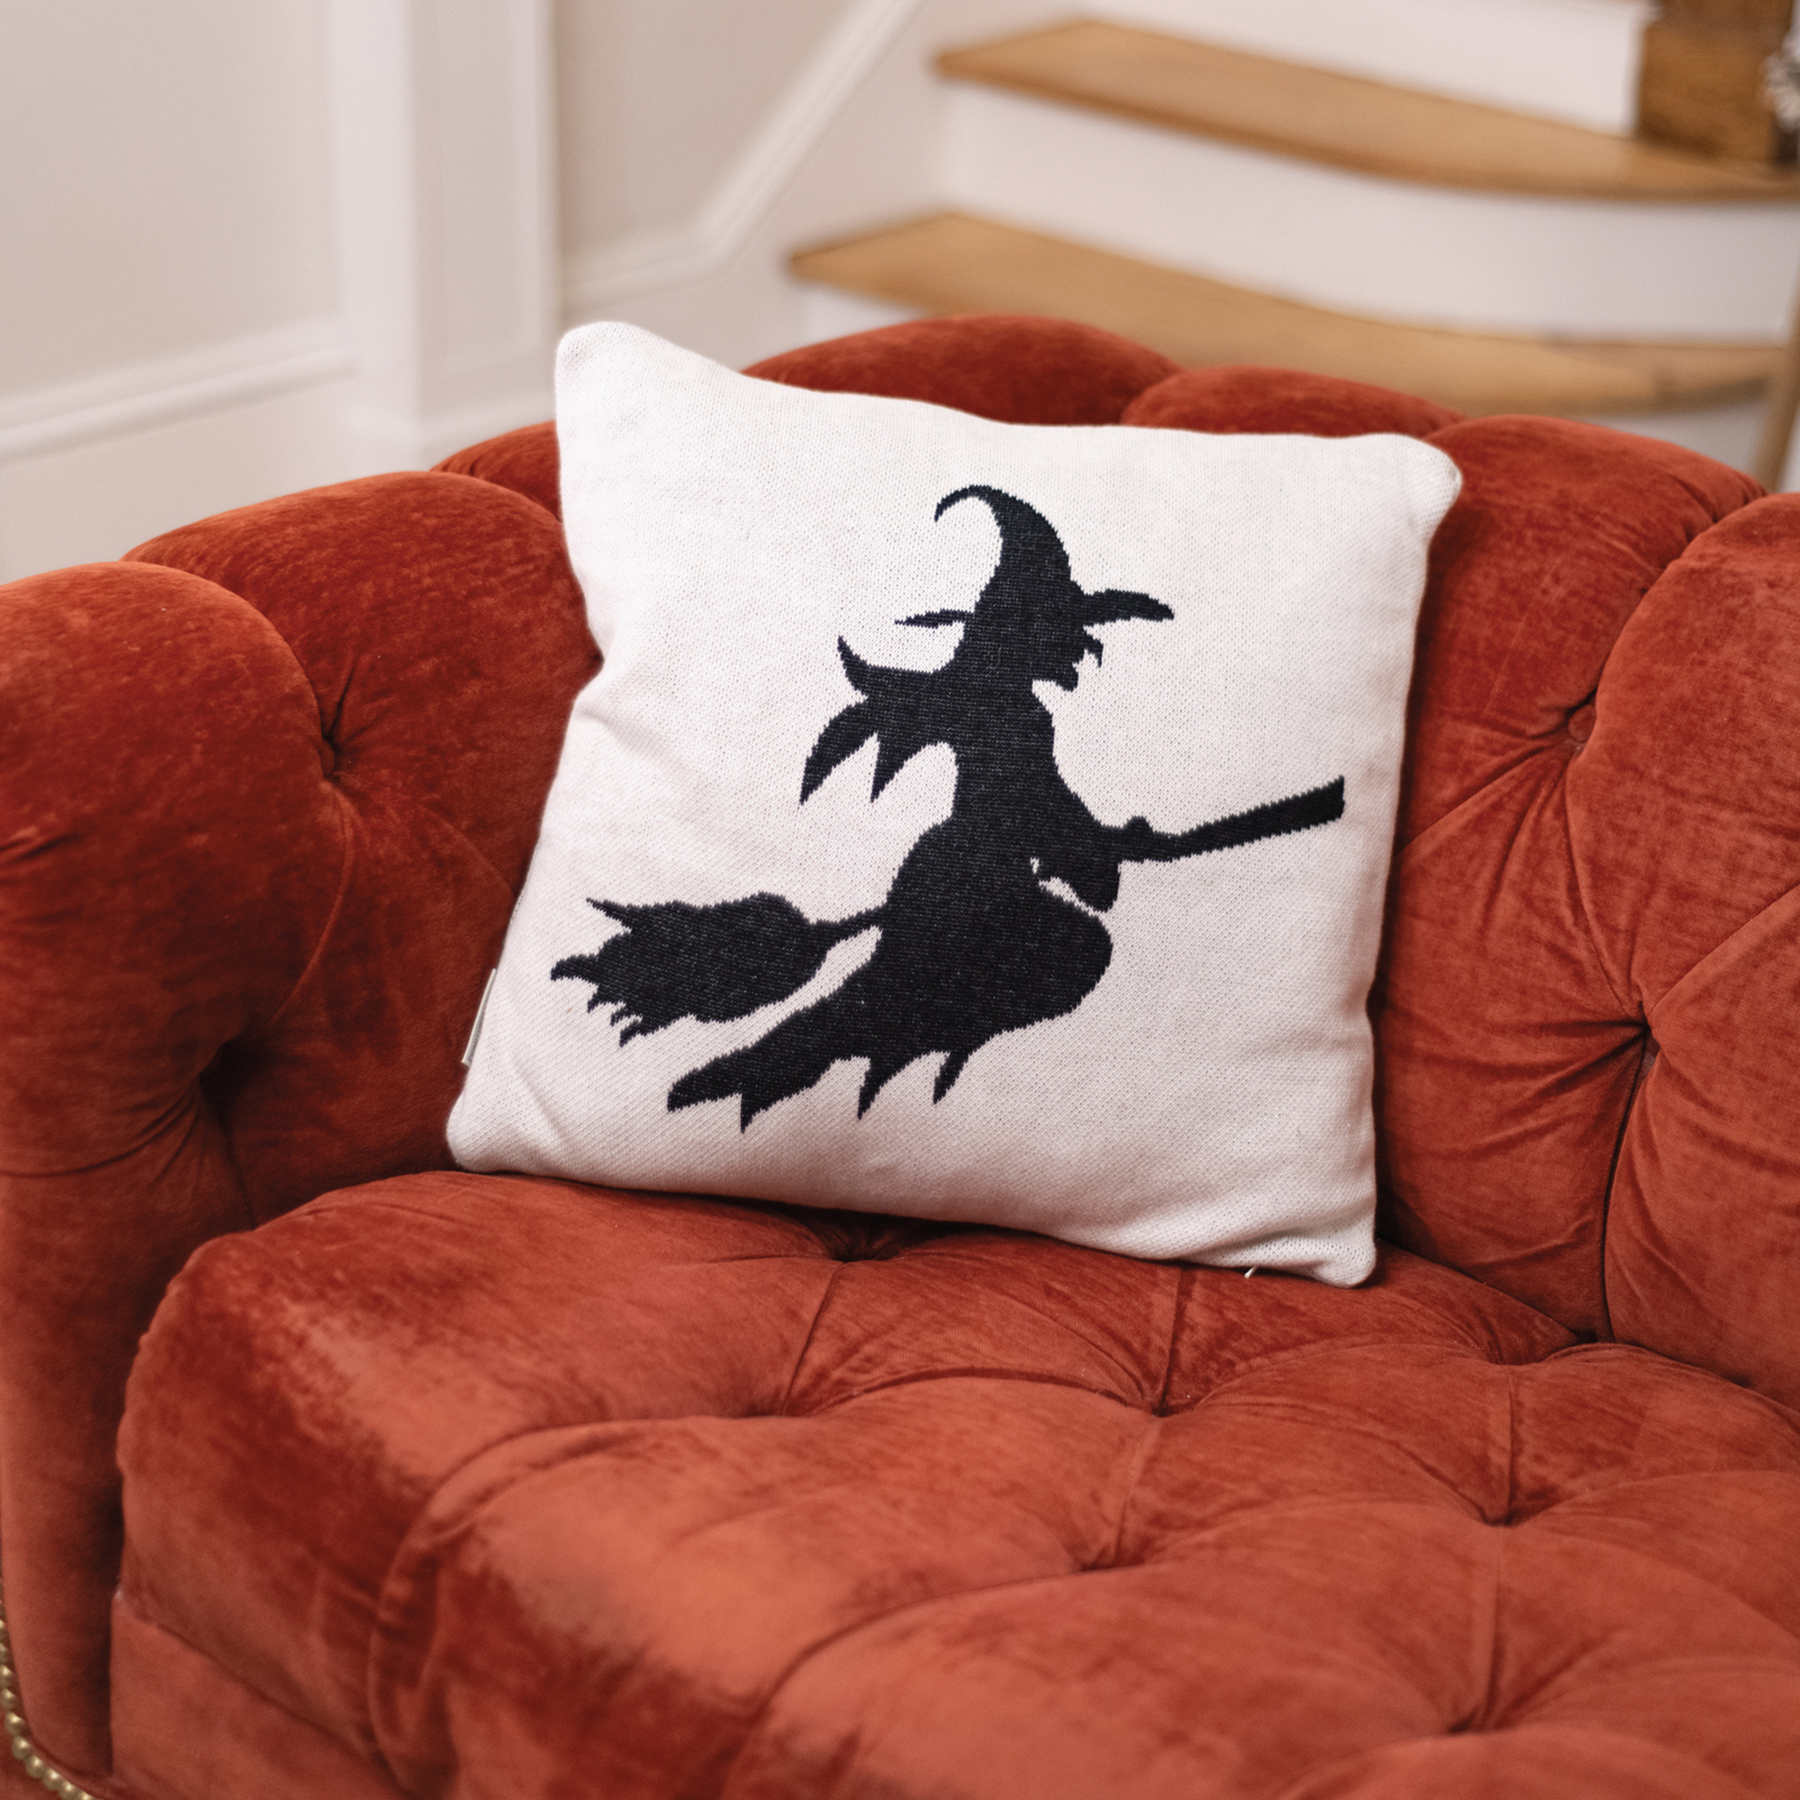 Halloween Witch Leg Pillow Wrap Burlap Pillow Also Available! Now in Stock